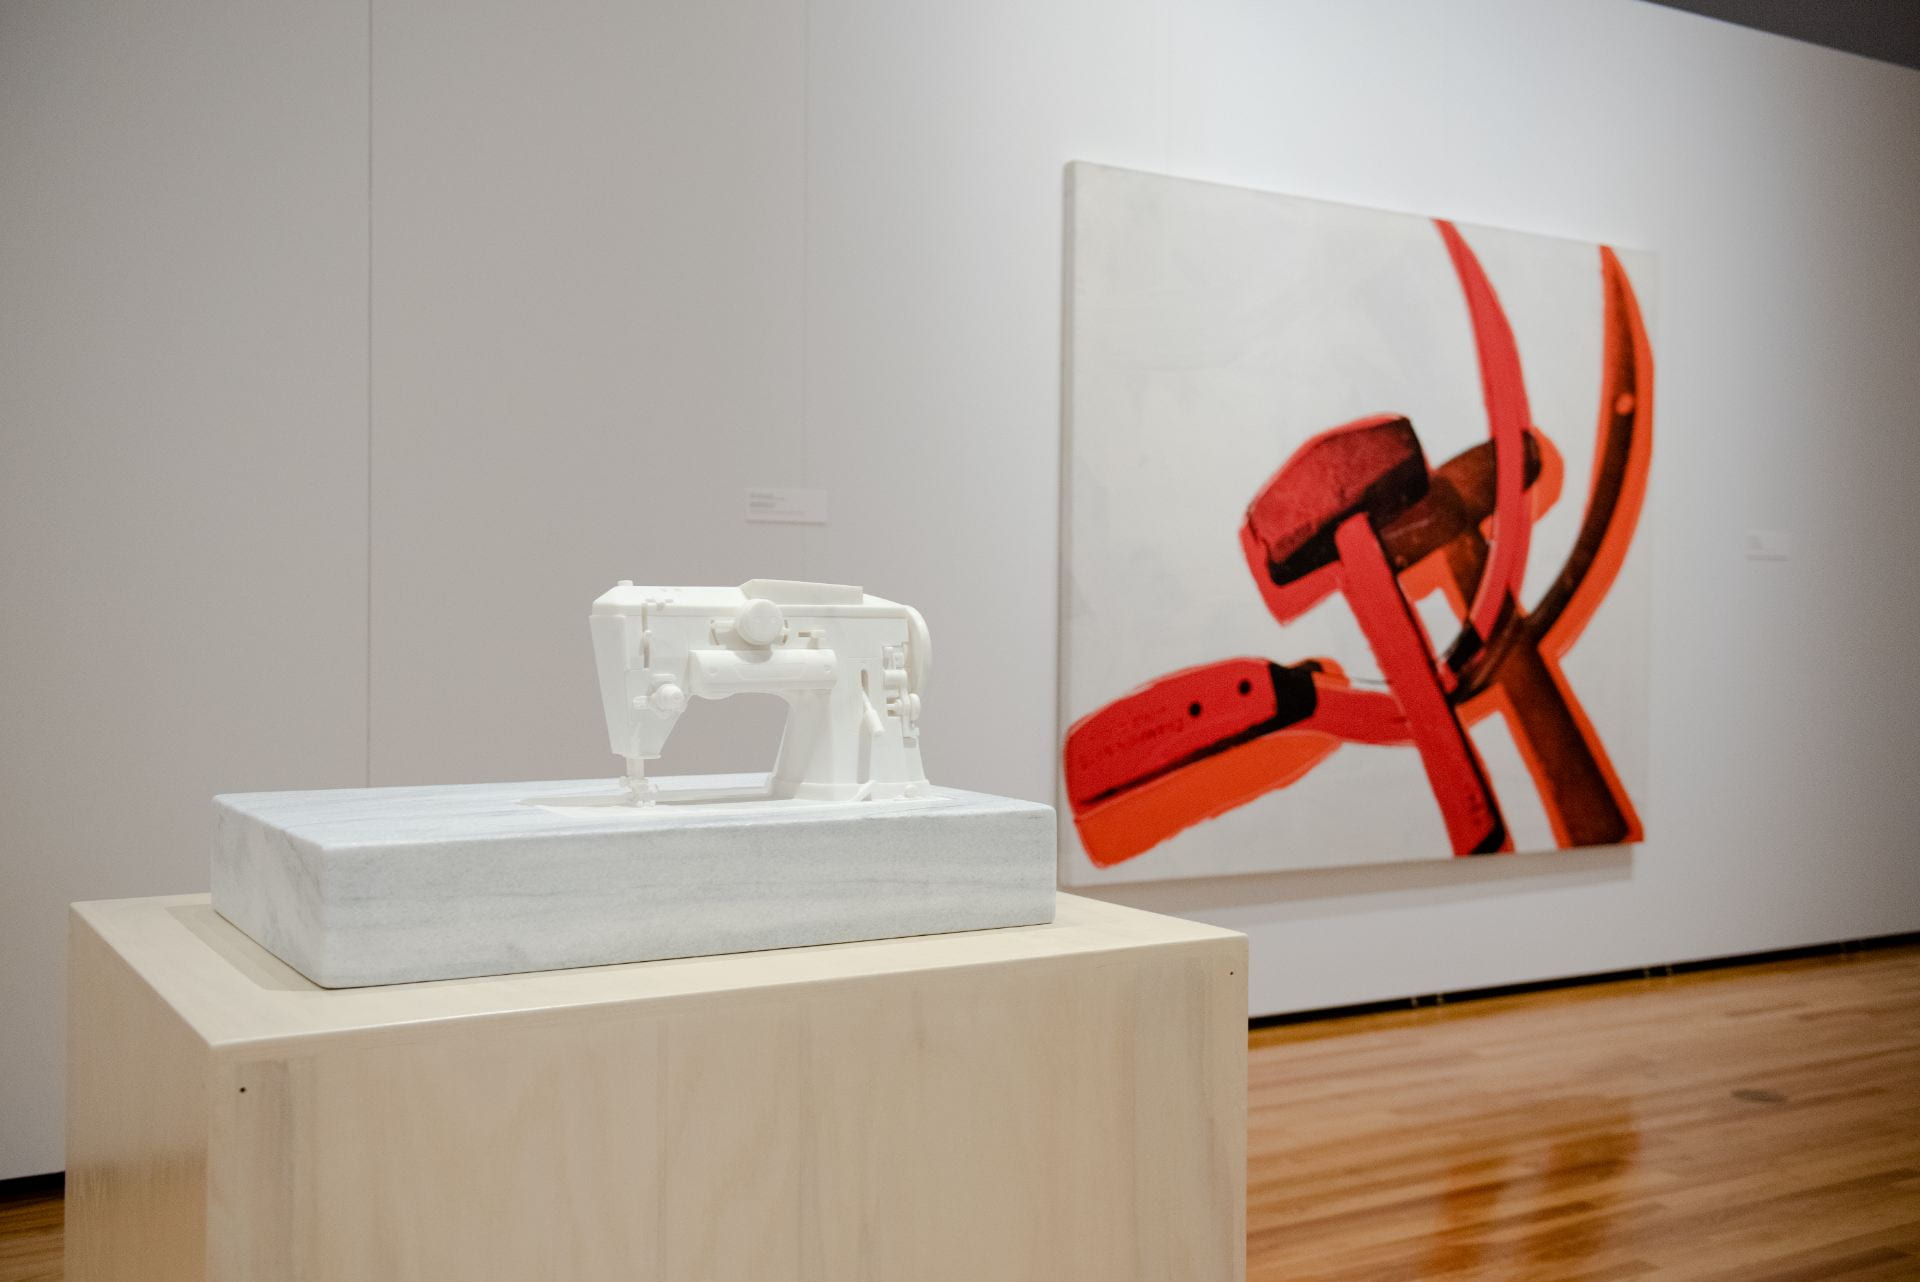 Gallery photo of the exhibition "Do You See What I See?" at the Beach Museum of Art